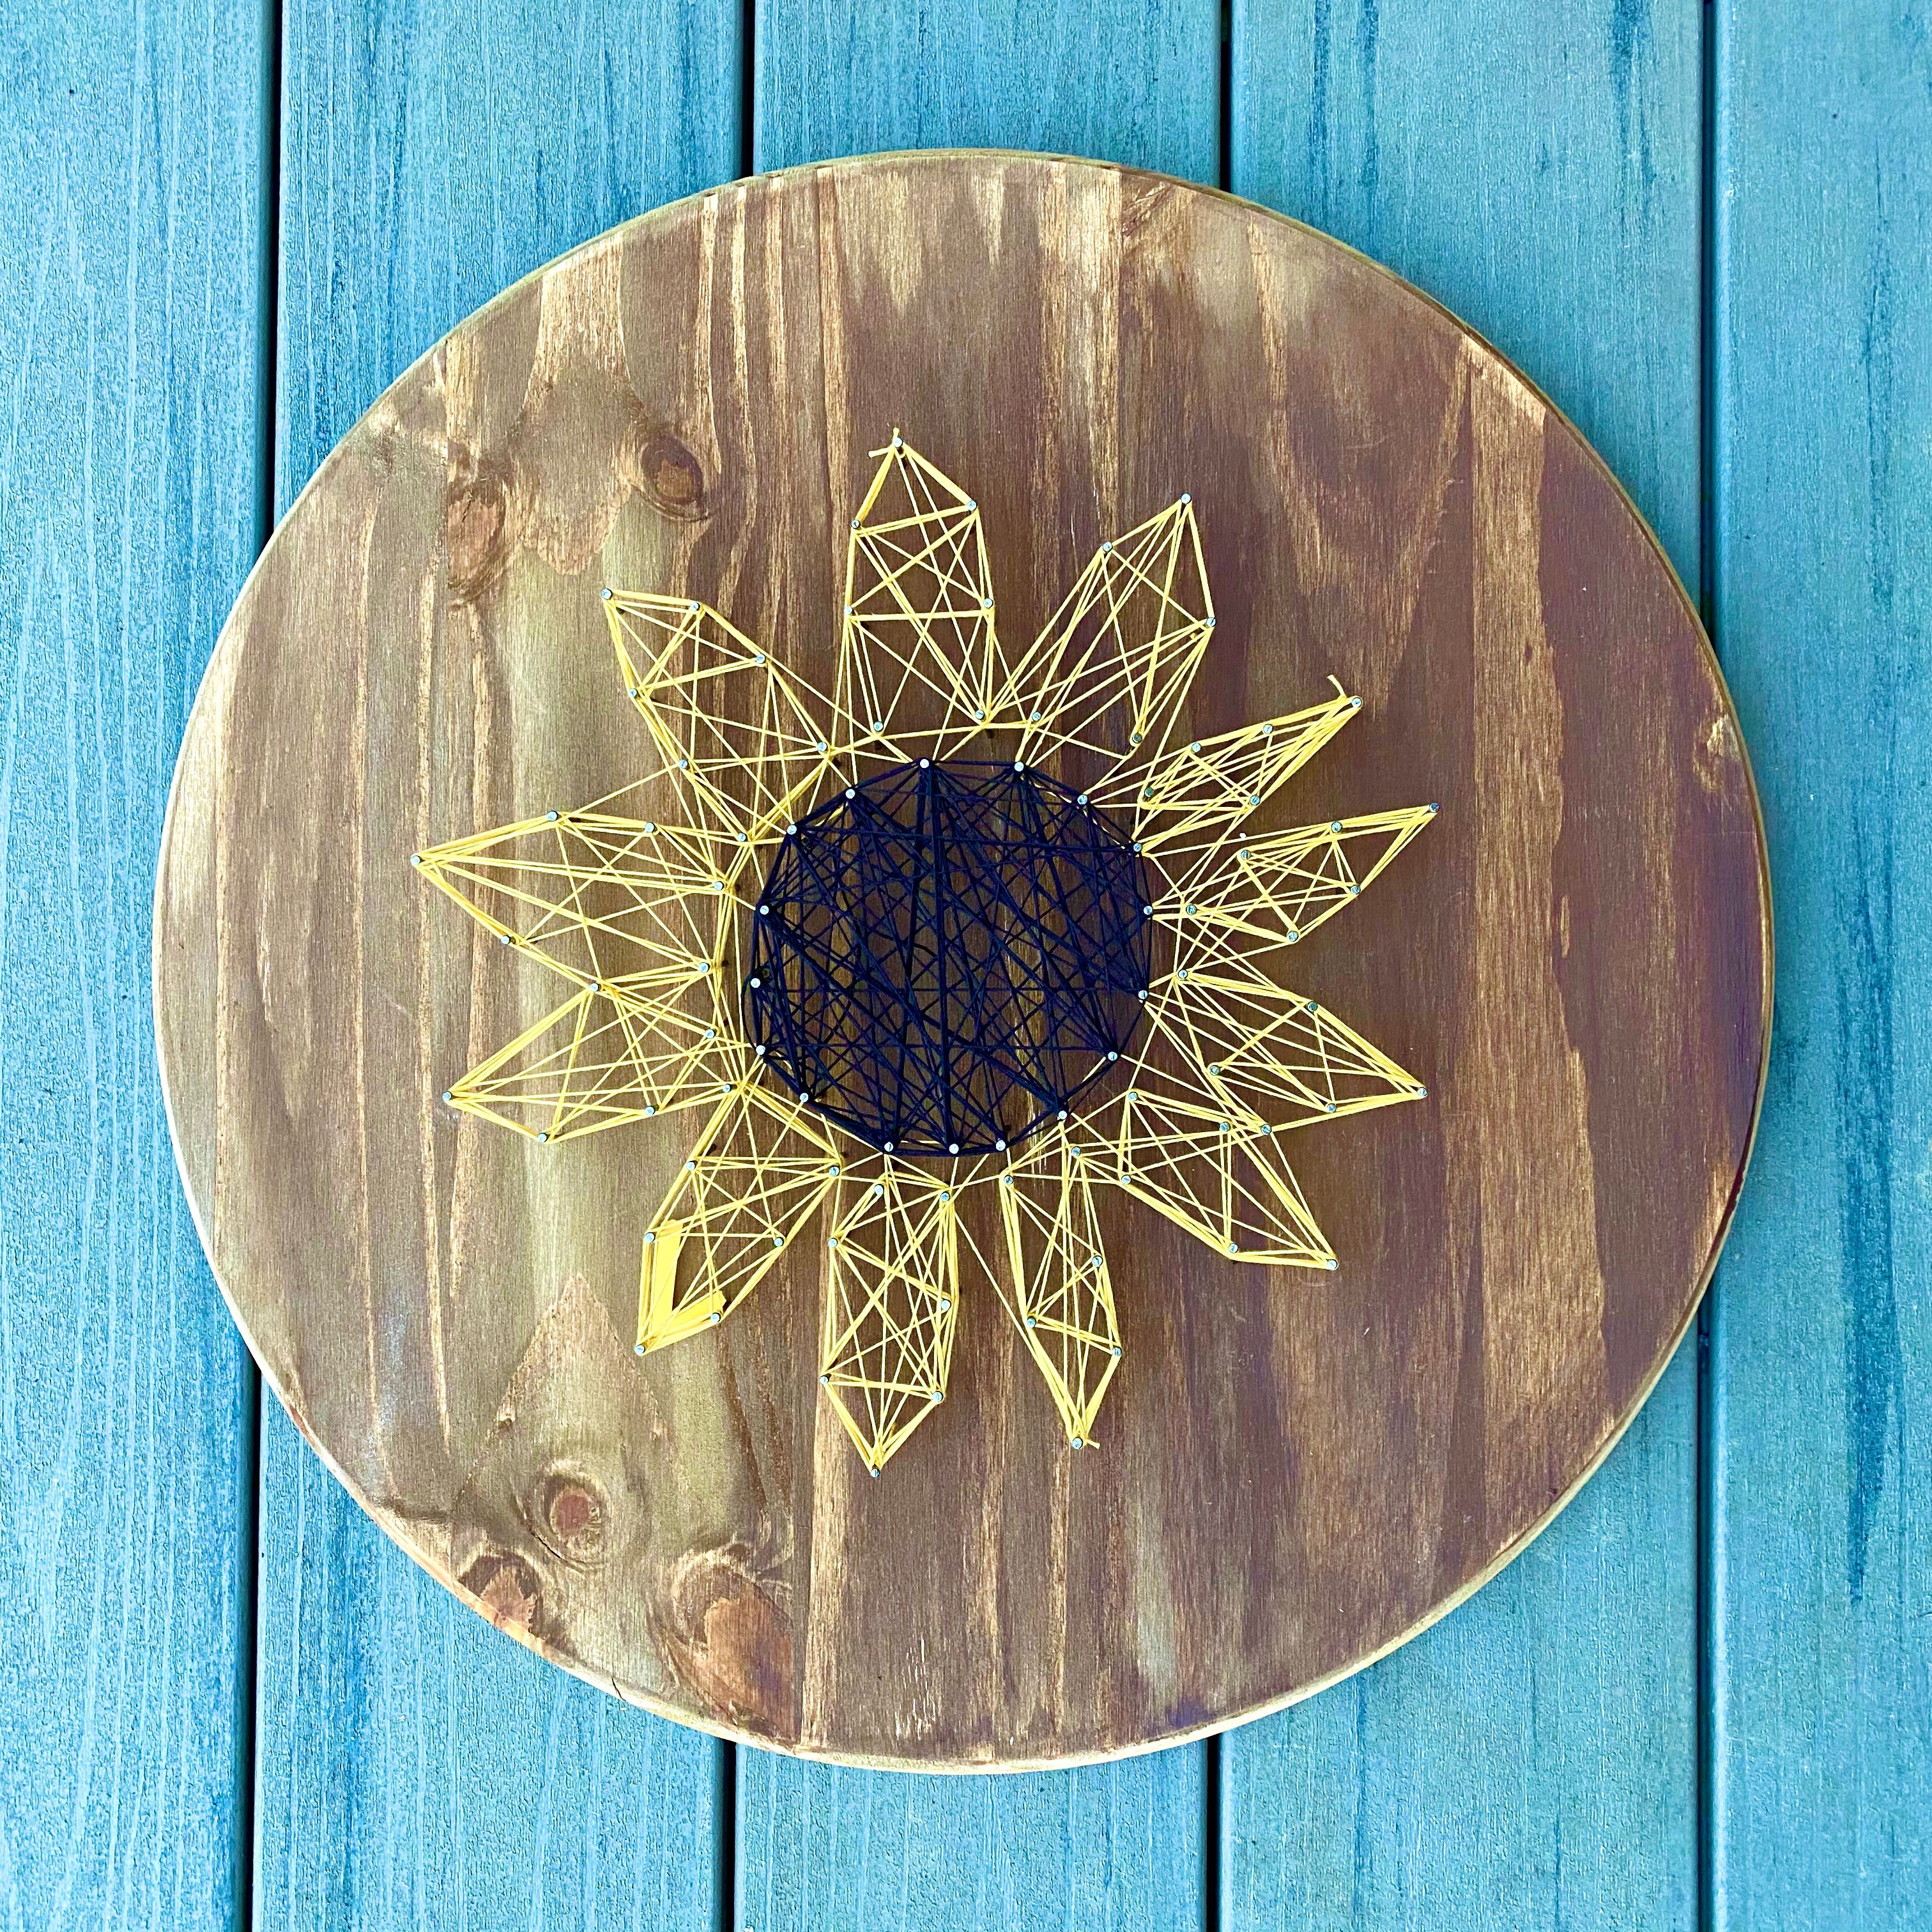 A String Art Sunflower on Wood Pine Pallet experience project by Yaymaker